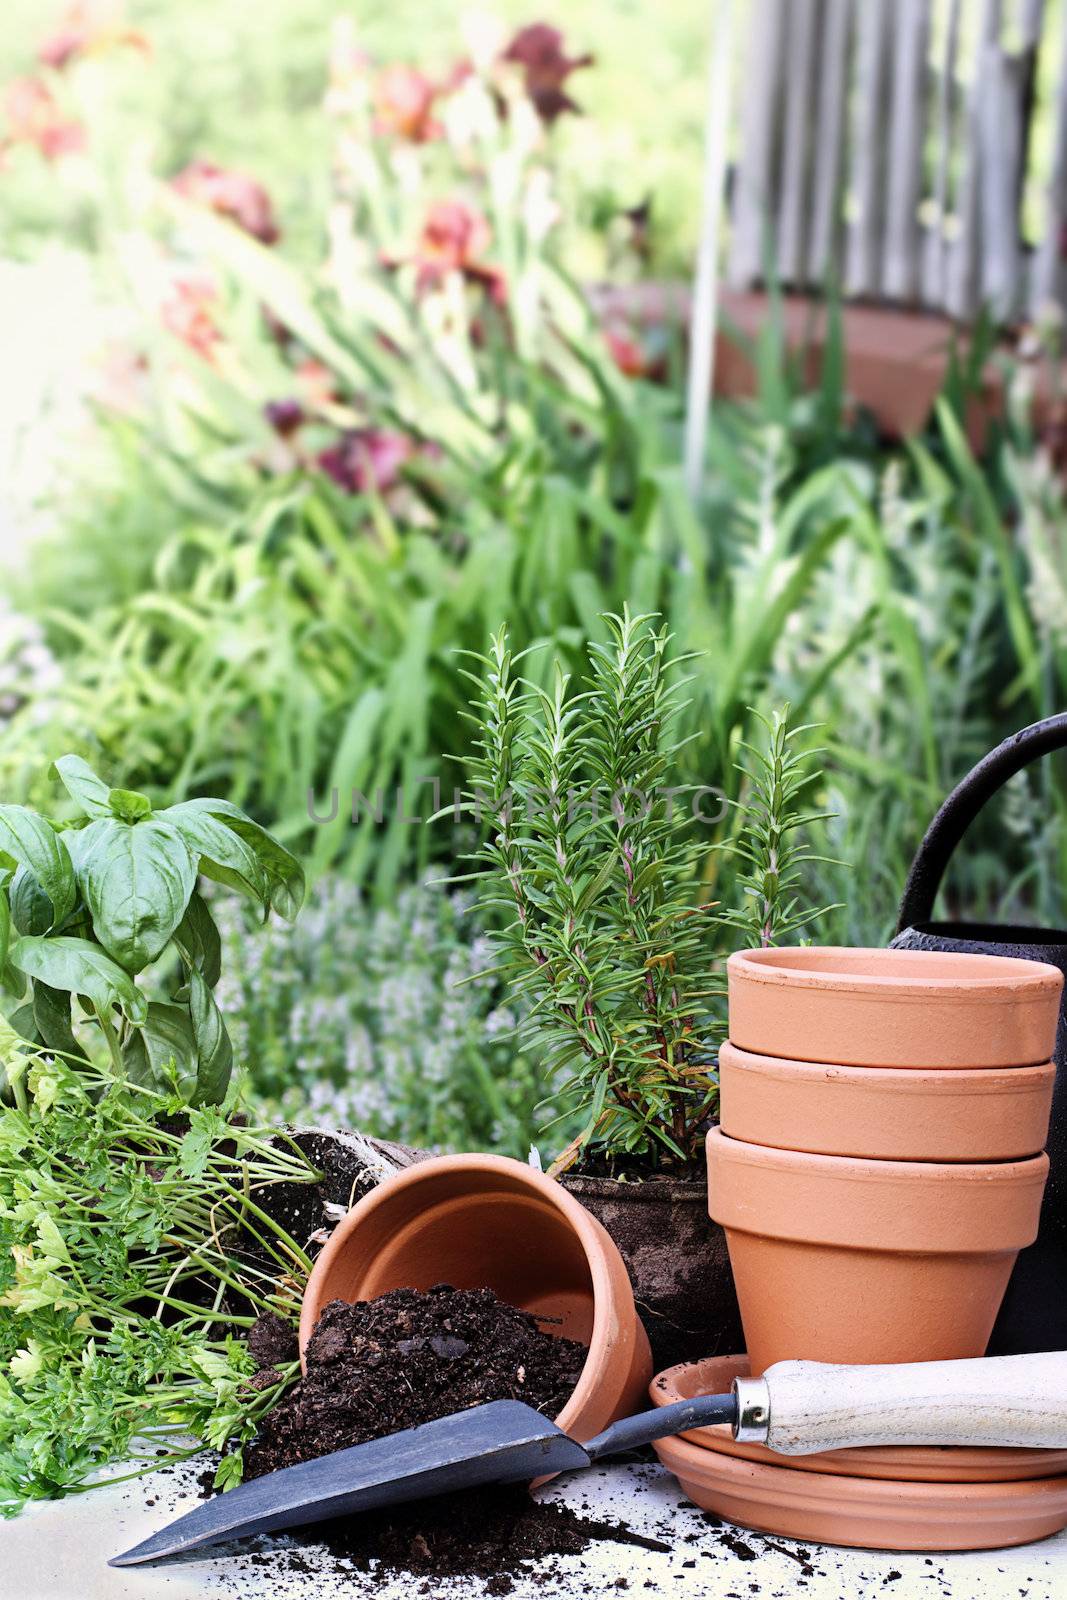 Rustic table with terracotta pots, potting soil, trowel and herbs in front of a beautiful garden surrounding a rustic porch.